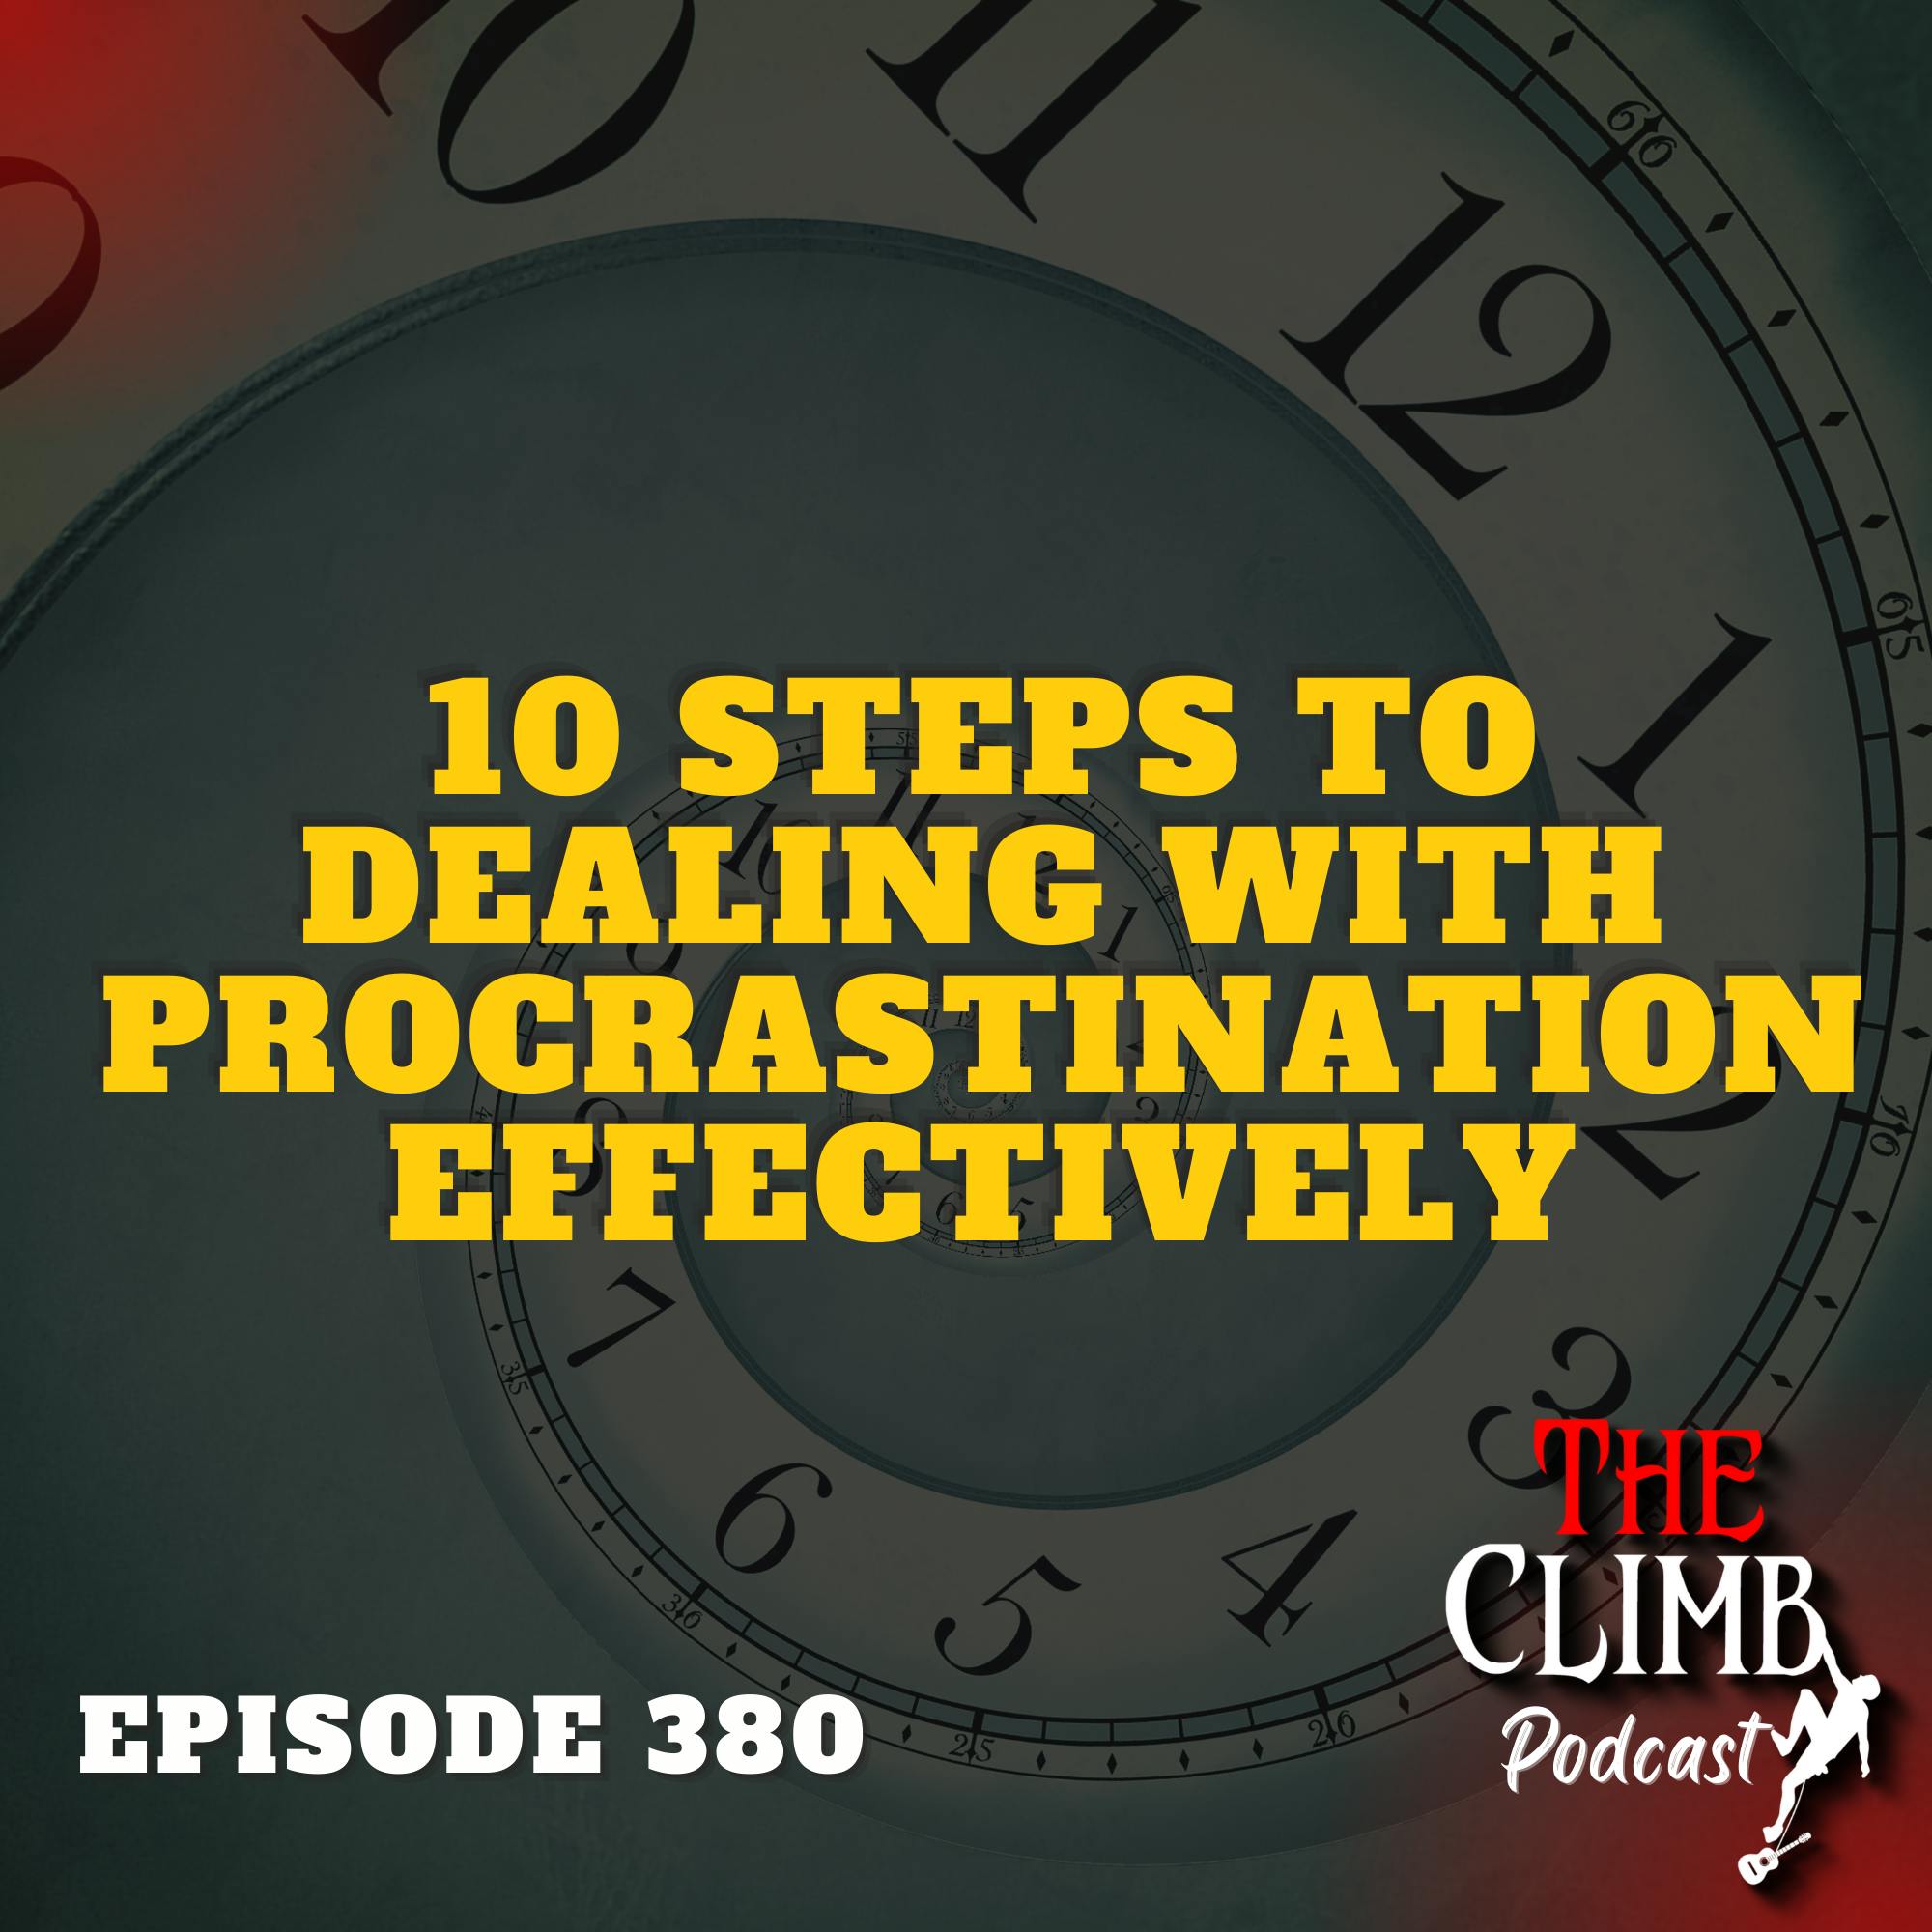 Ep 380: 10 Steps To Dealing With Procrastination Effectively